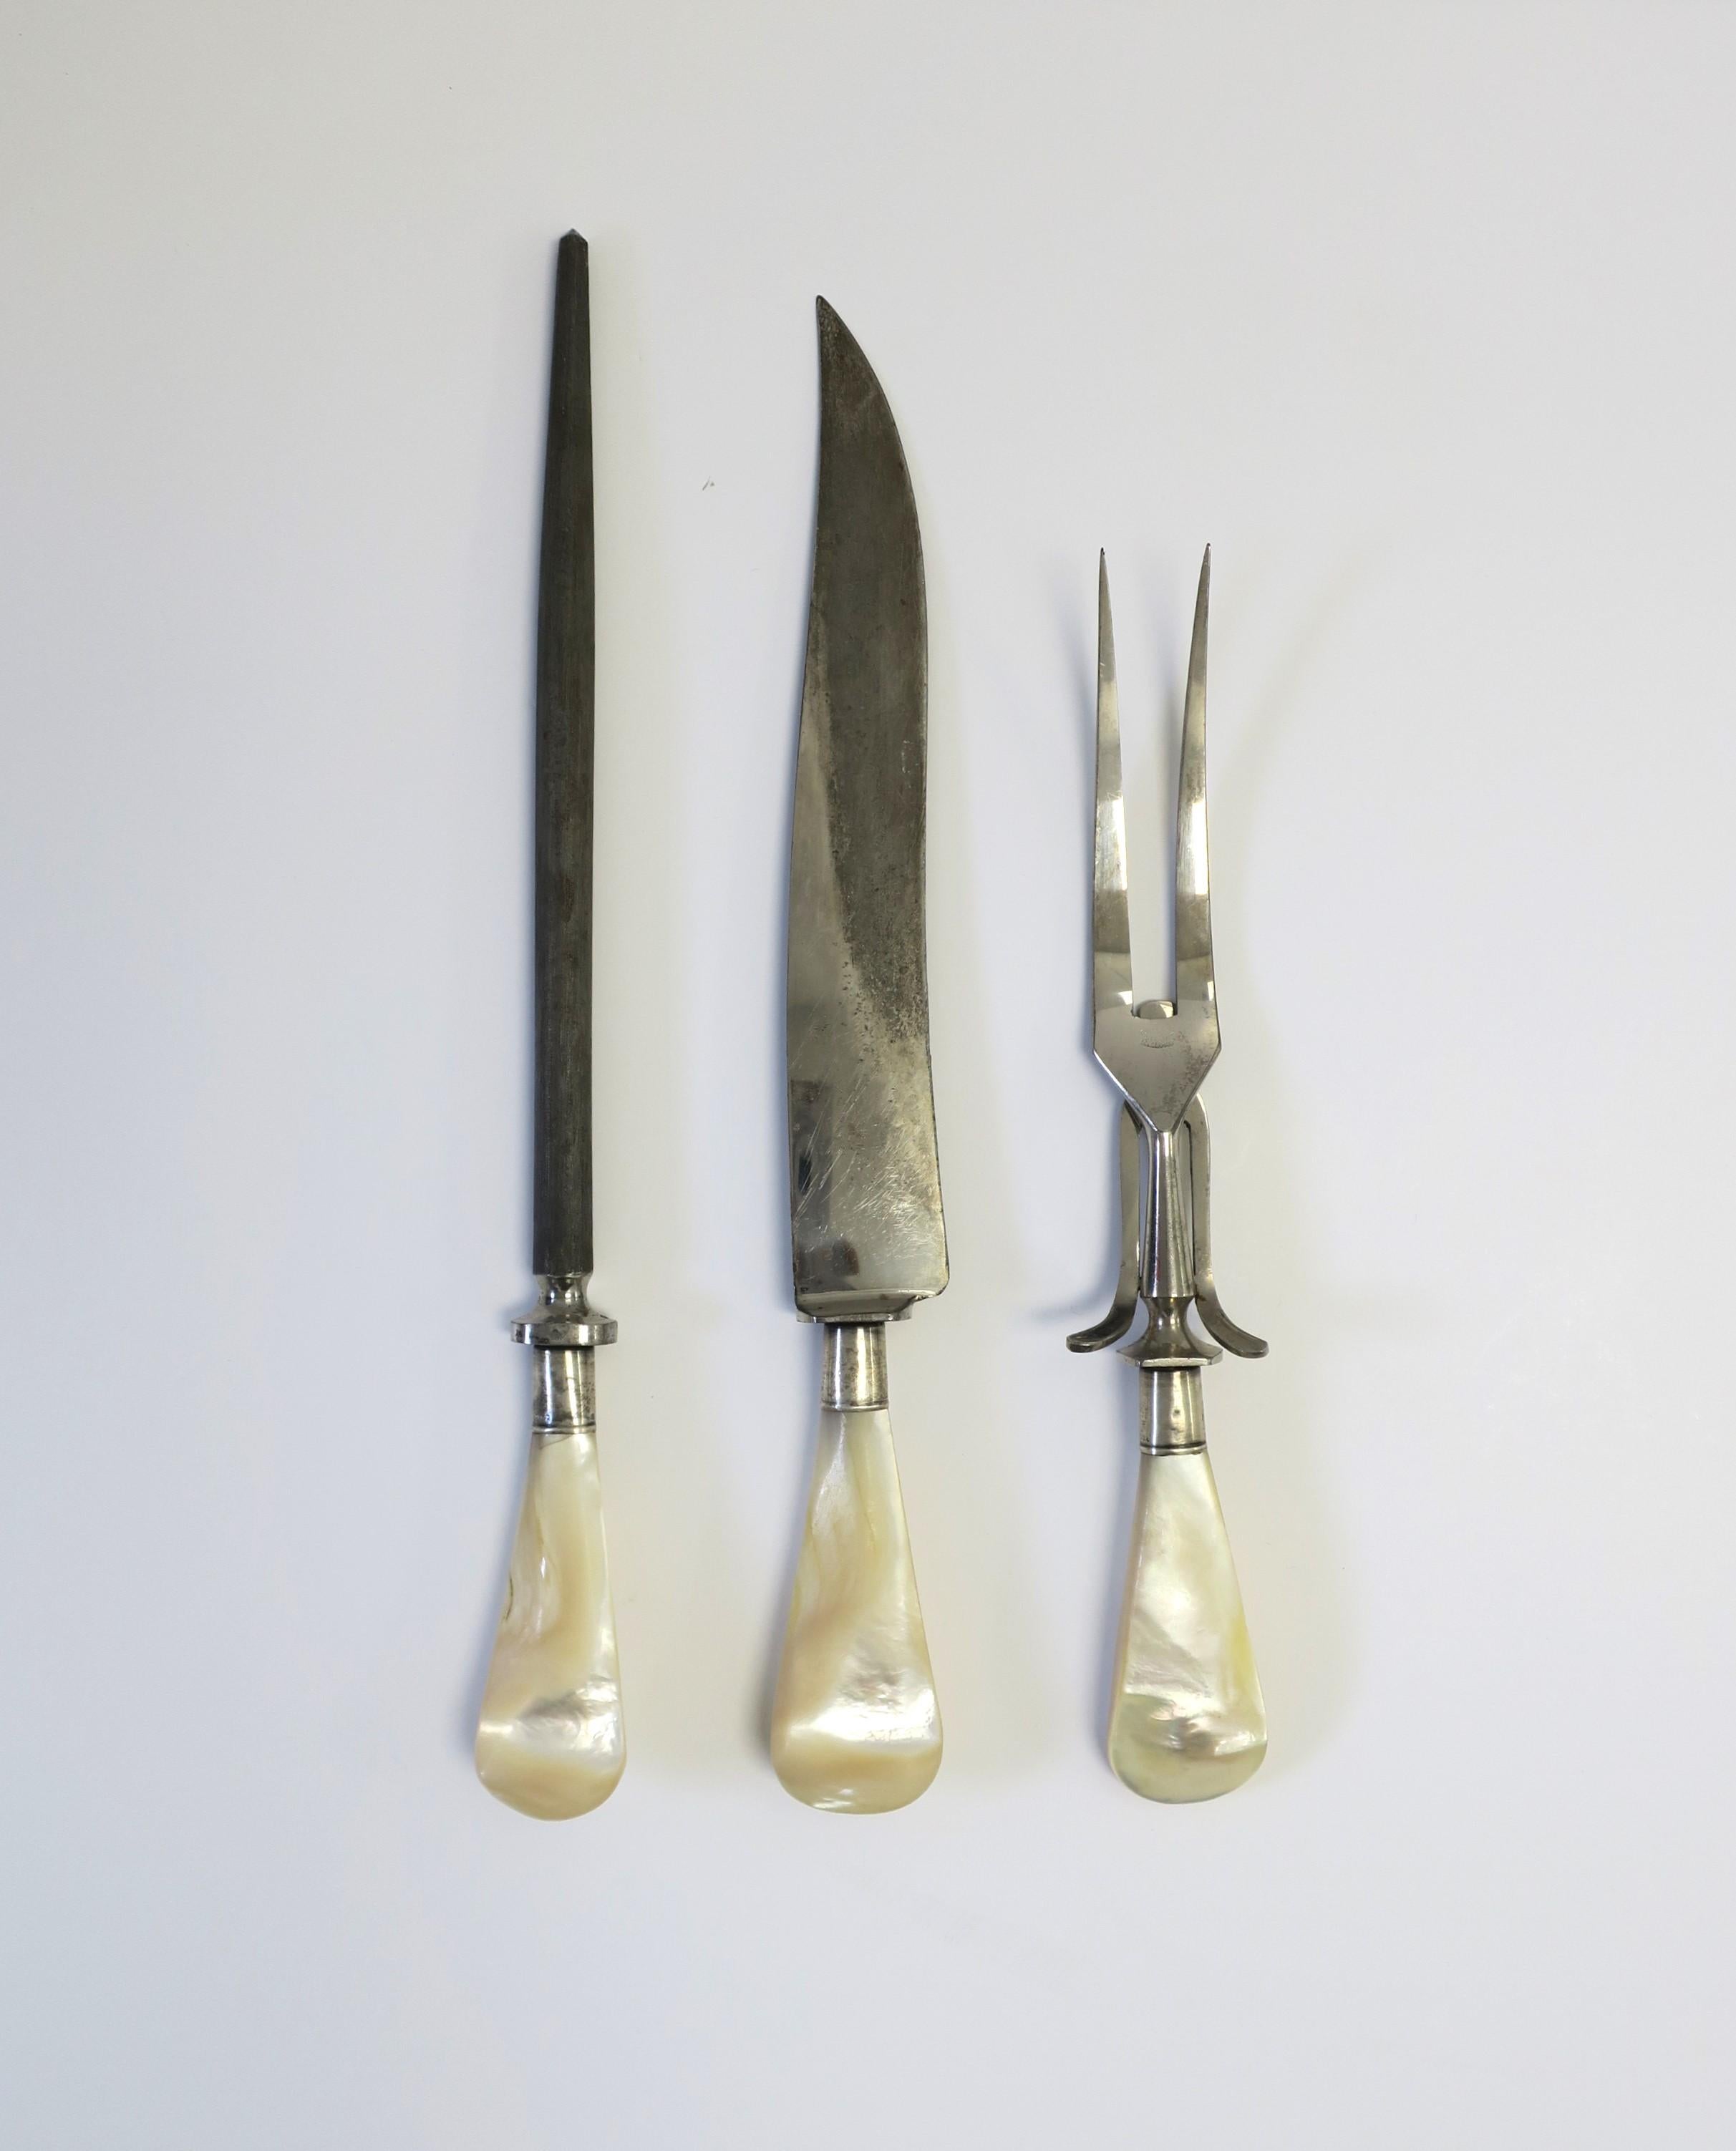 A fine stainless steel German carving set with mother of pearl handles, from Carl Wolfertz & Sohne, circa 20th century, Solingen, Germany. Set includes carving knife, fork, and sharpening steel, all with steel endcaps and mother of pearl handles.